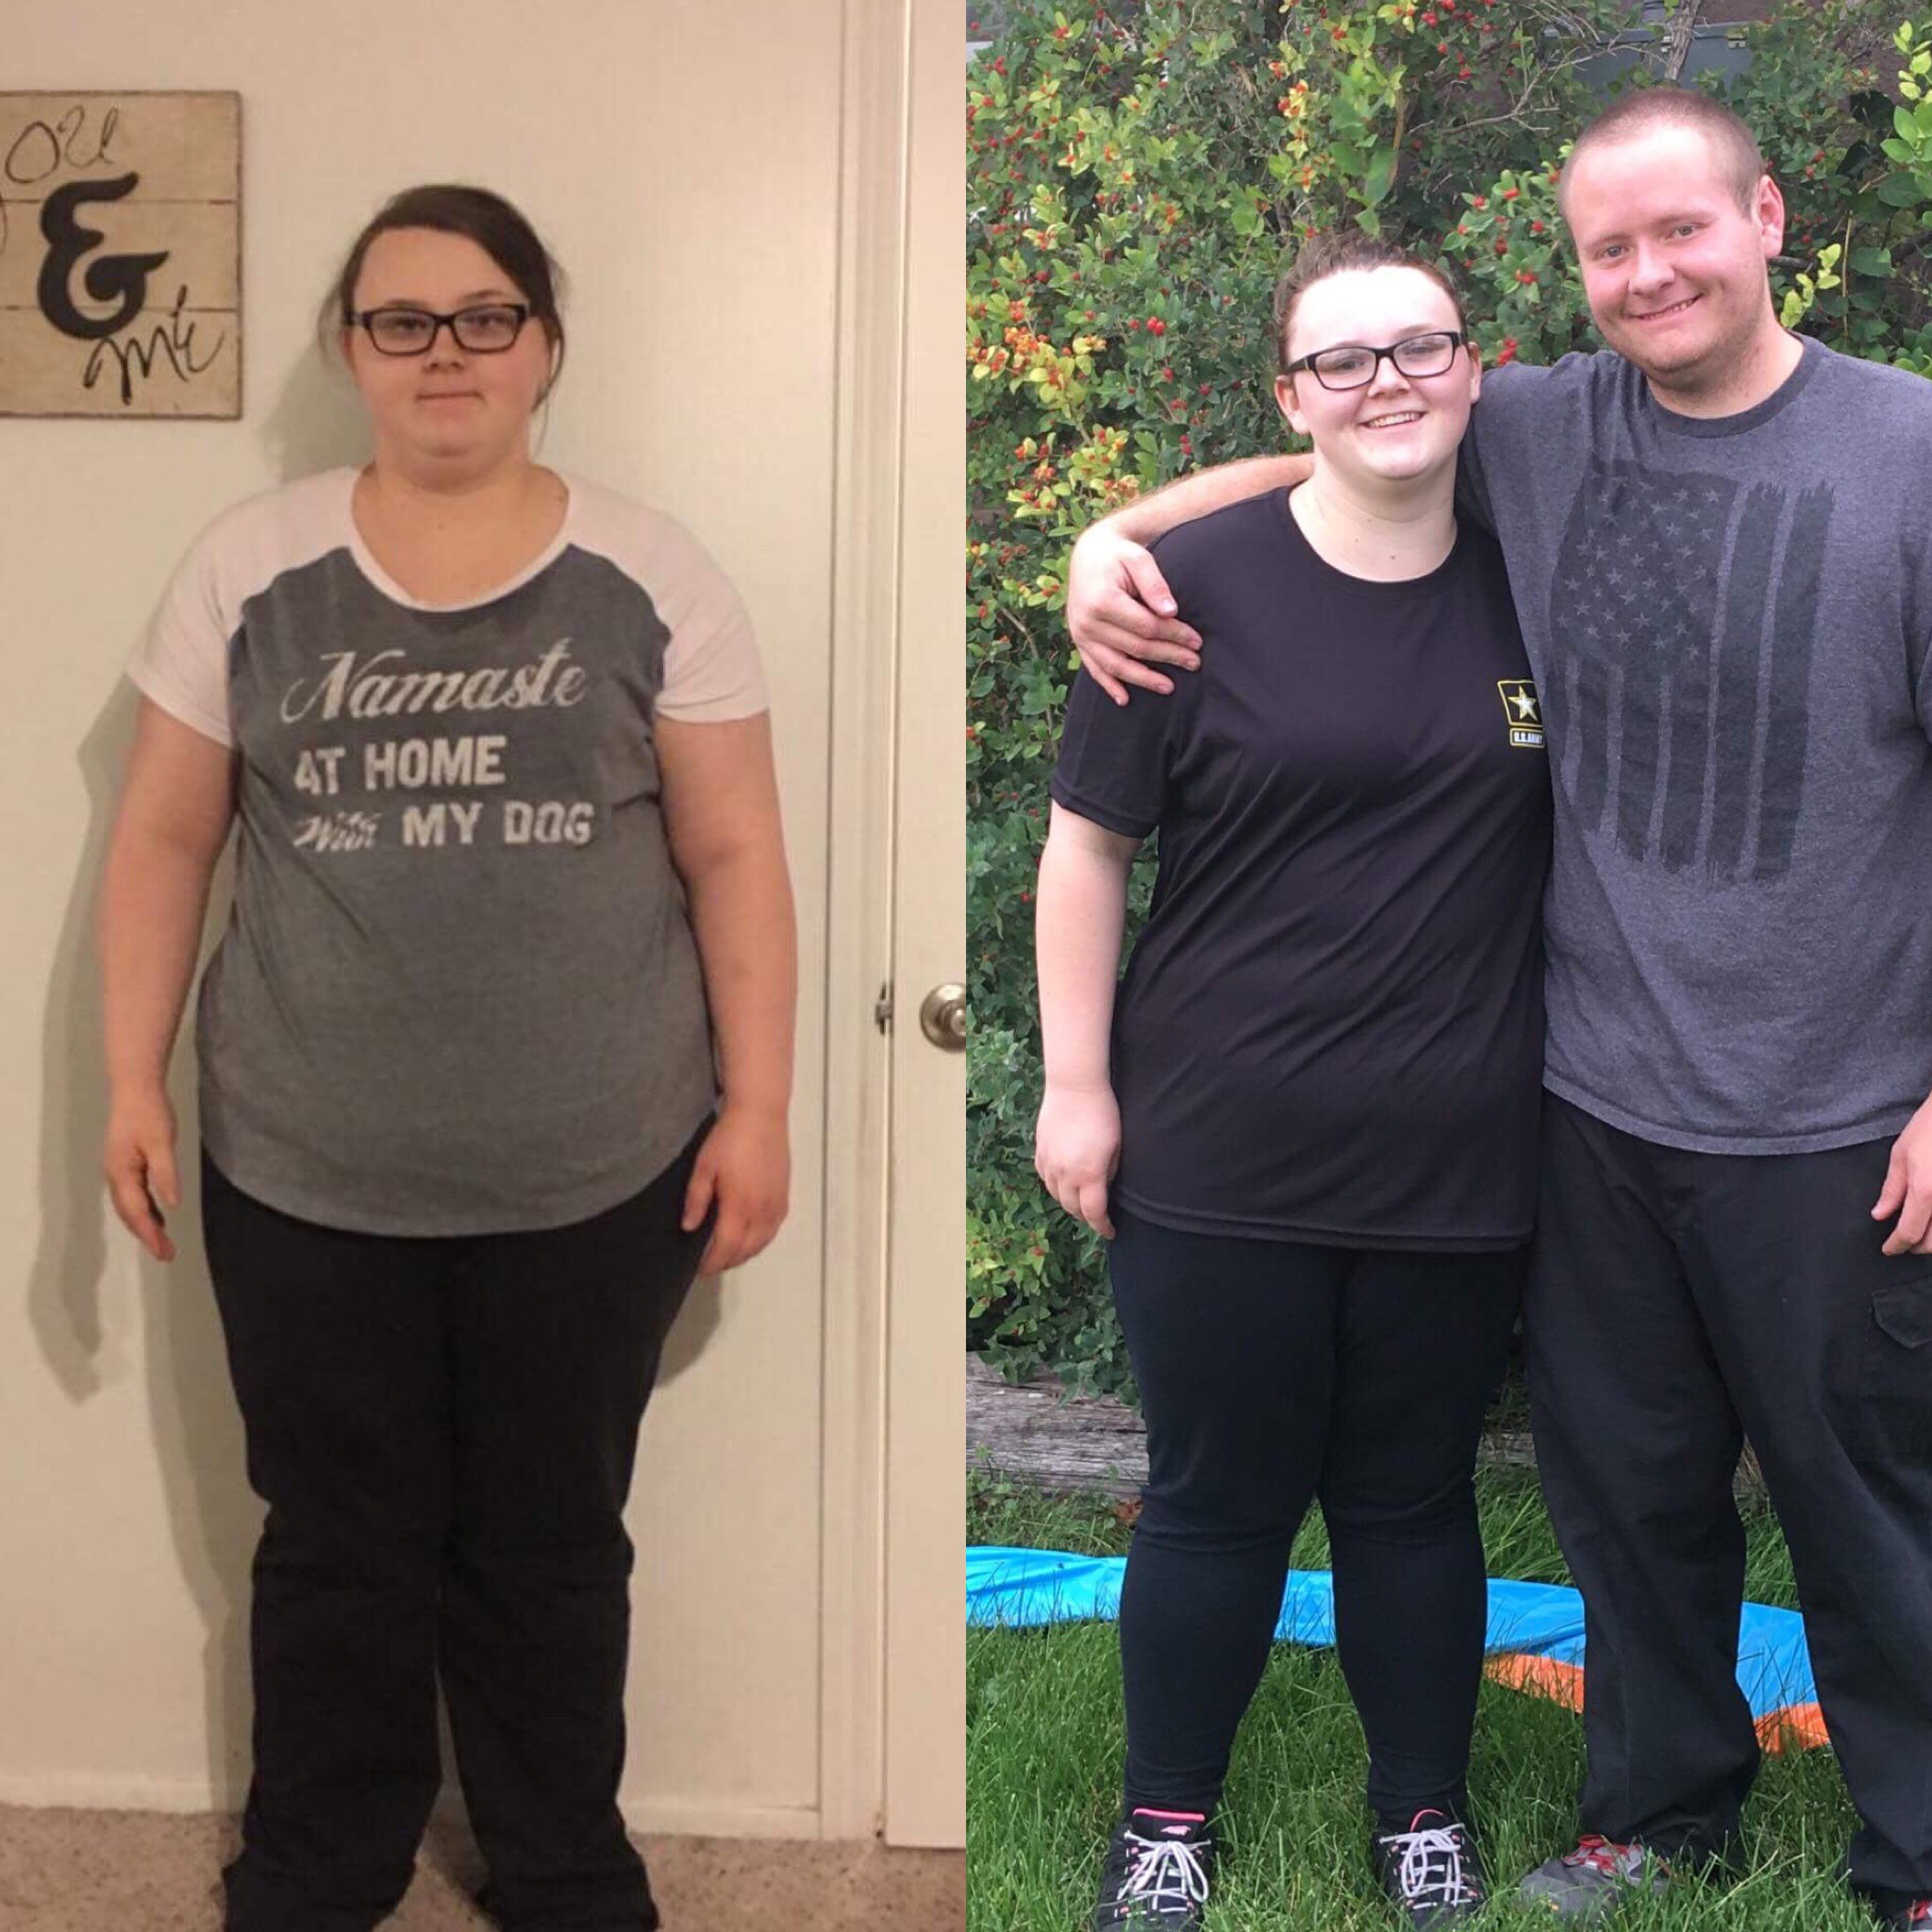 Megan Lost 45 Pounds CleanFoodCrush story